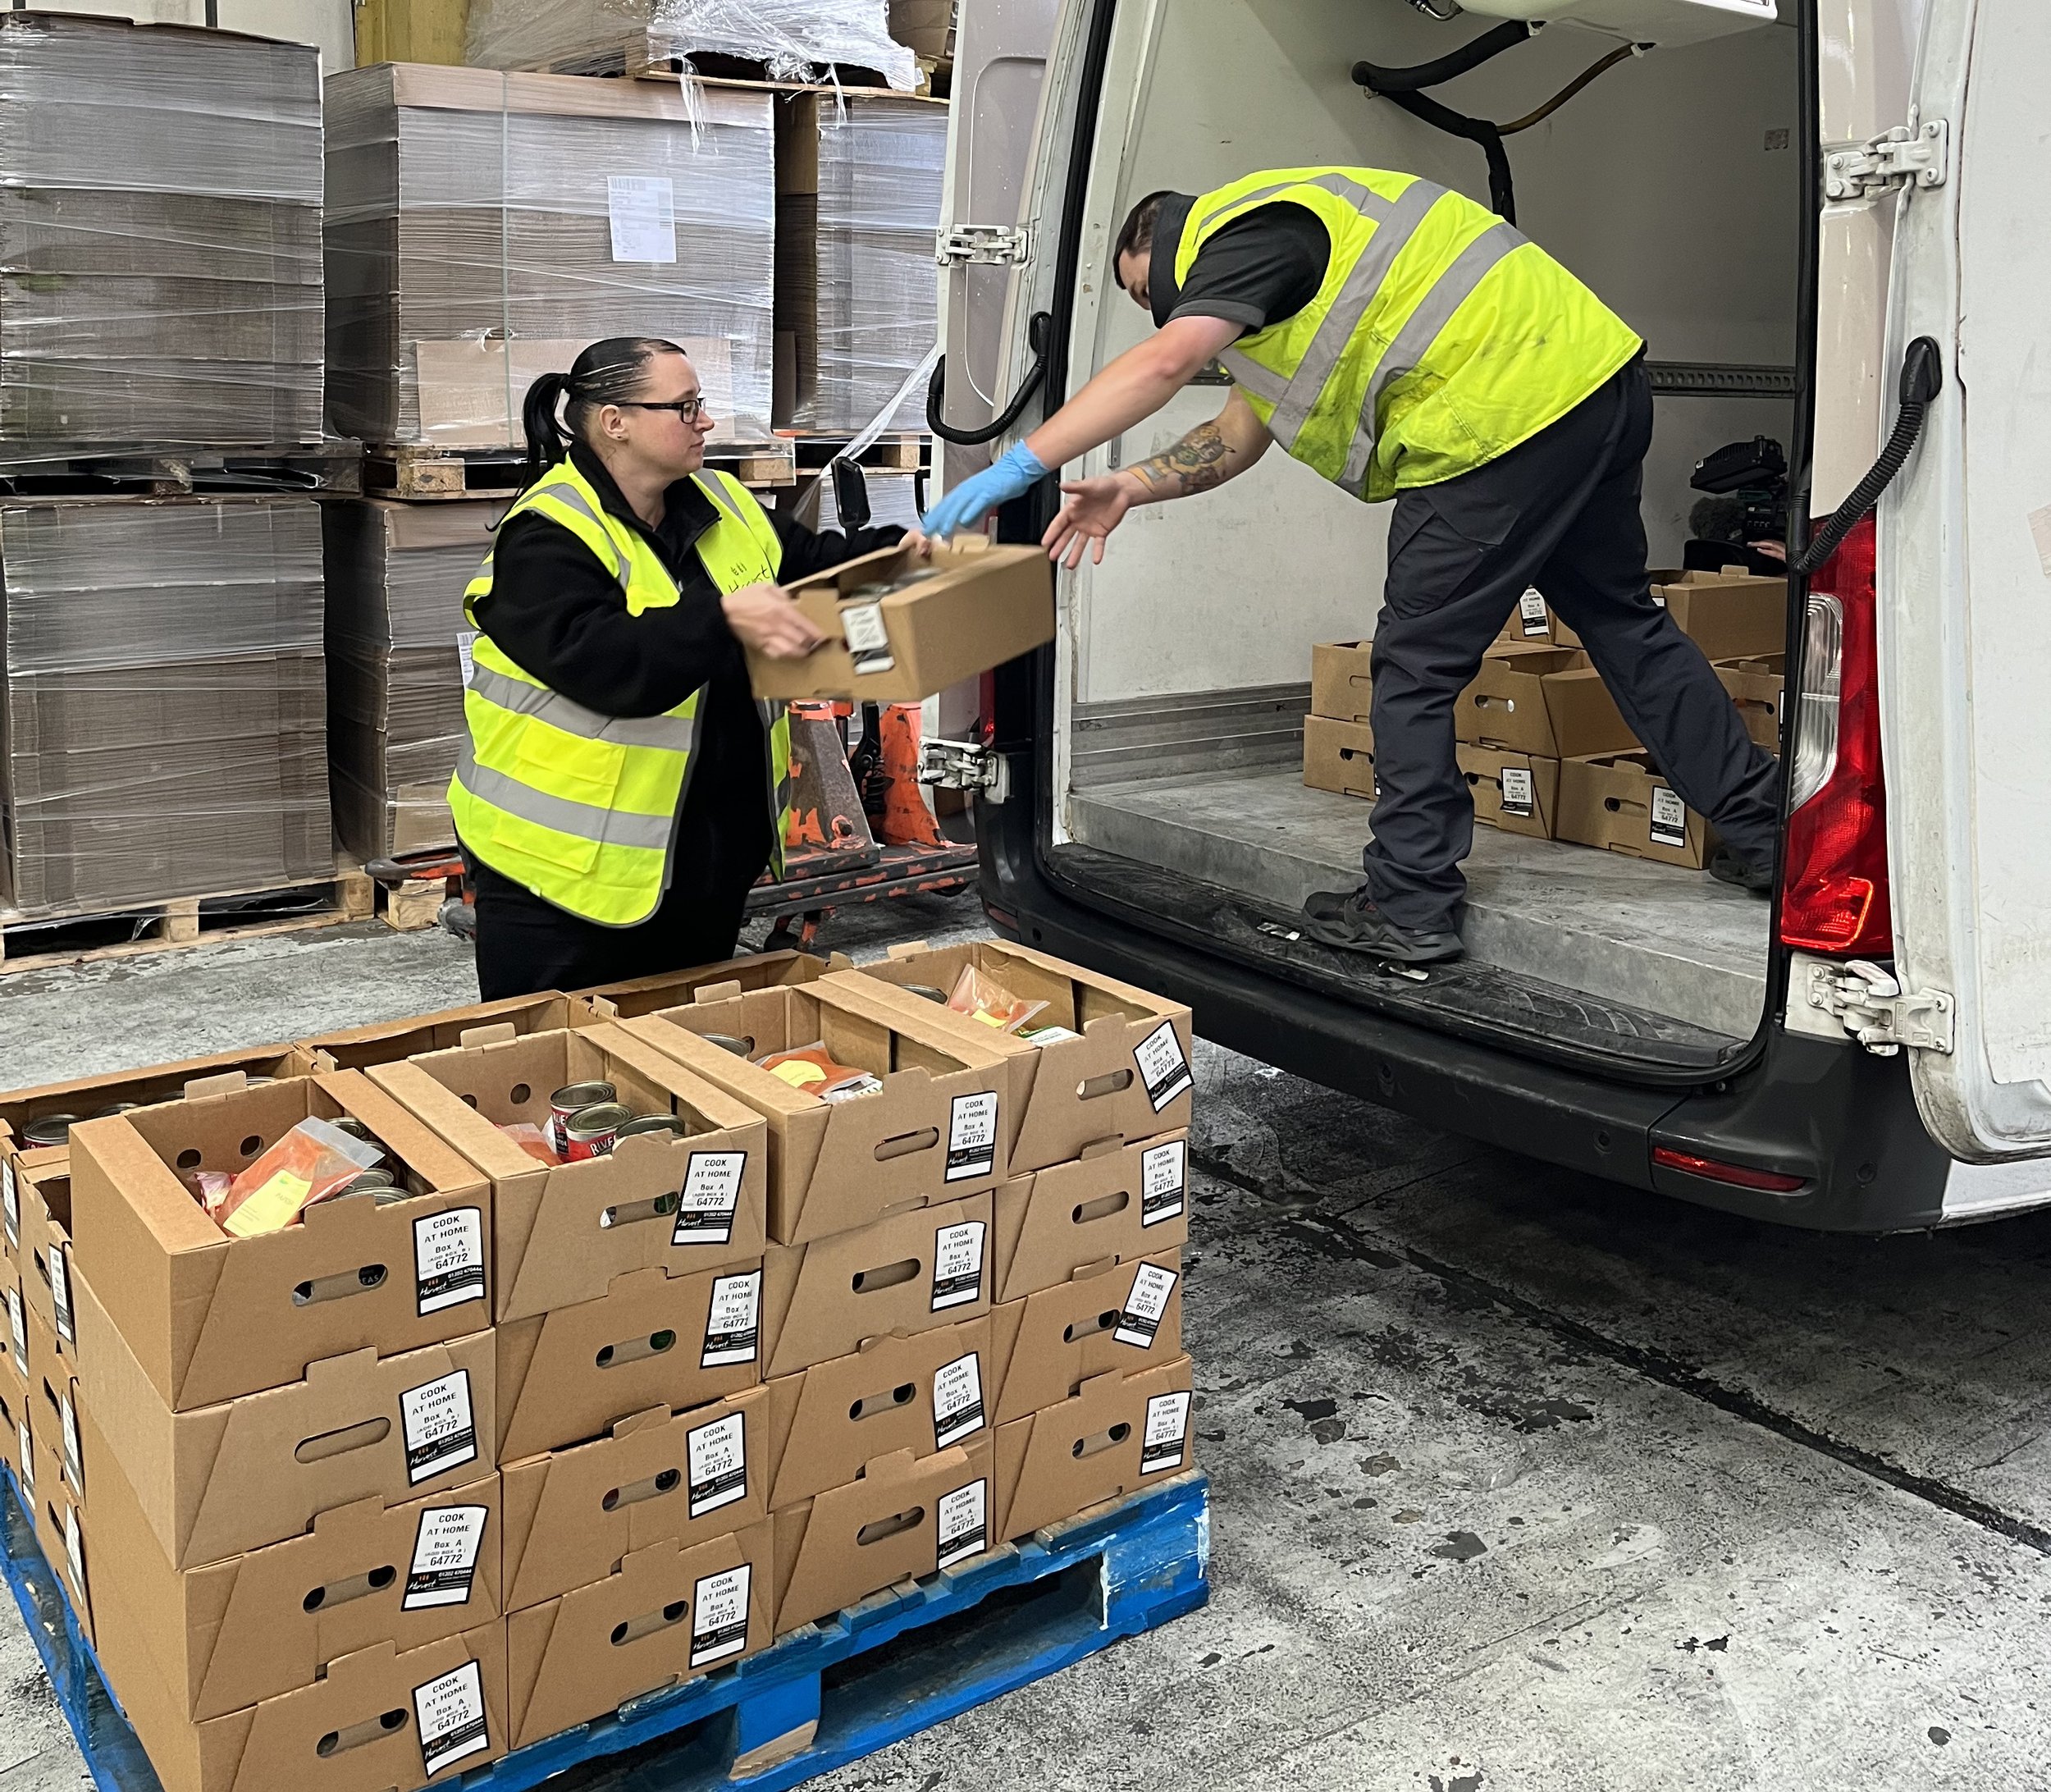 The boxes being loaded into van.jpg